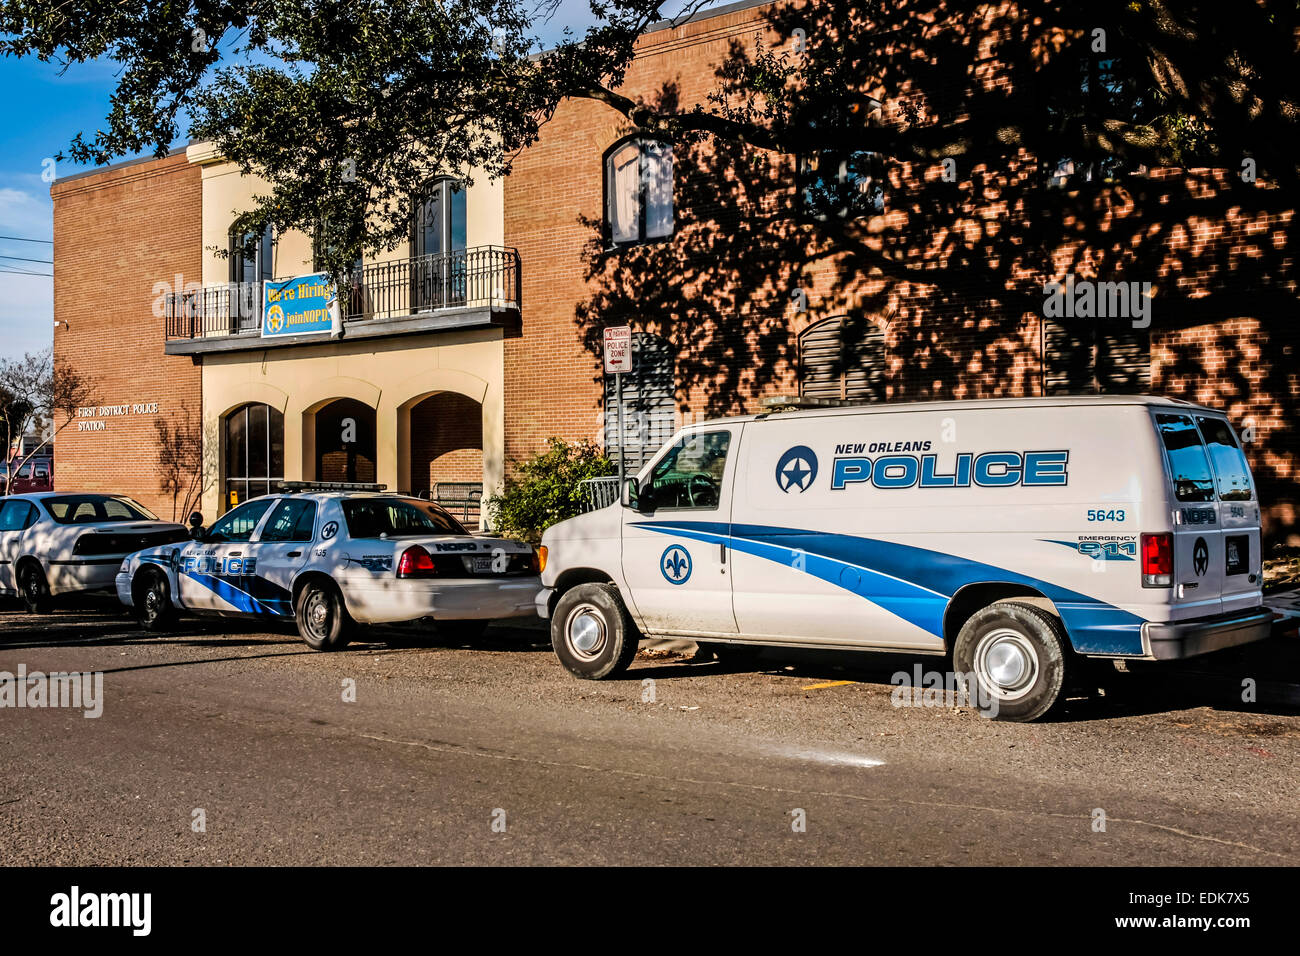 New Orleans City Police vehicles outside the Police Station on Rapart St Stock Photo